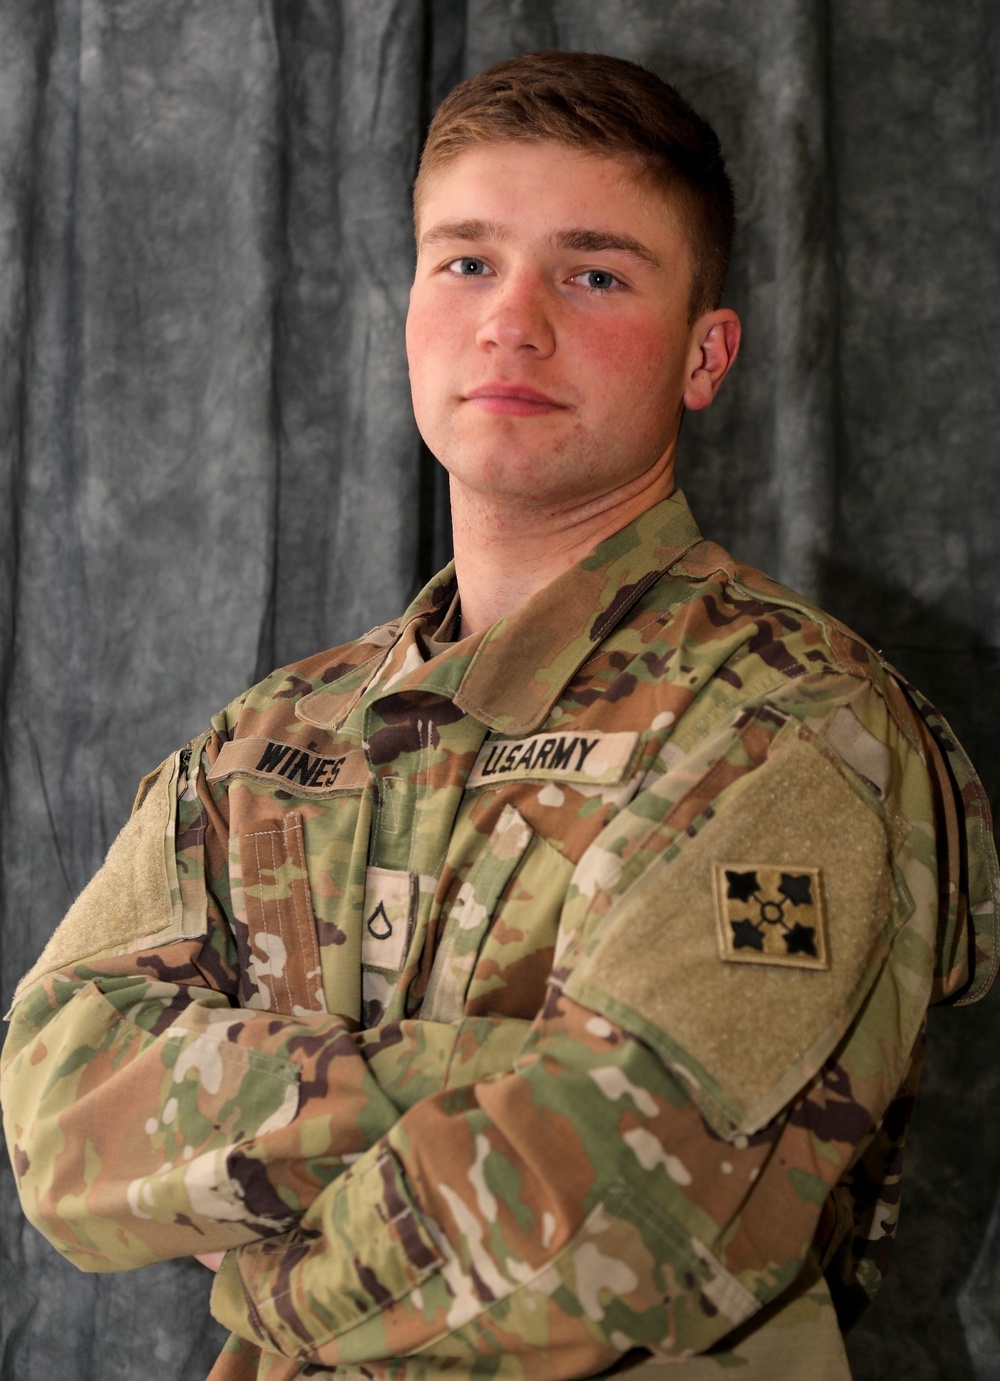 DVIDS - Images - 4th Infantry Division Soldier of the Quarter